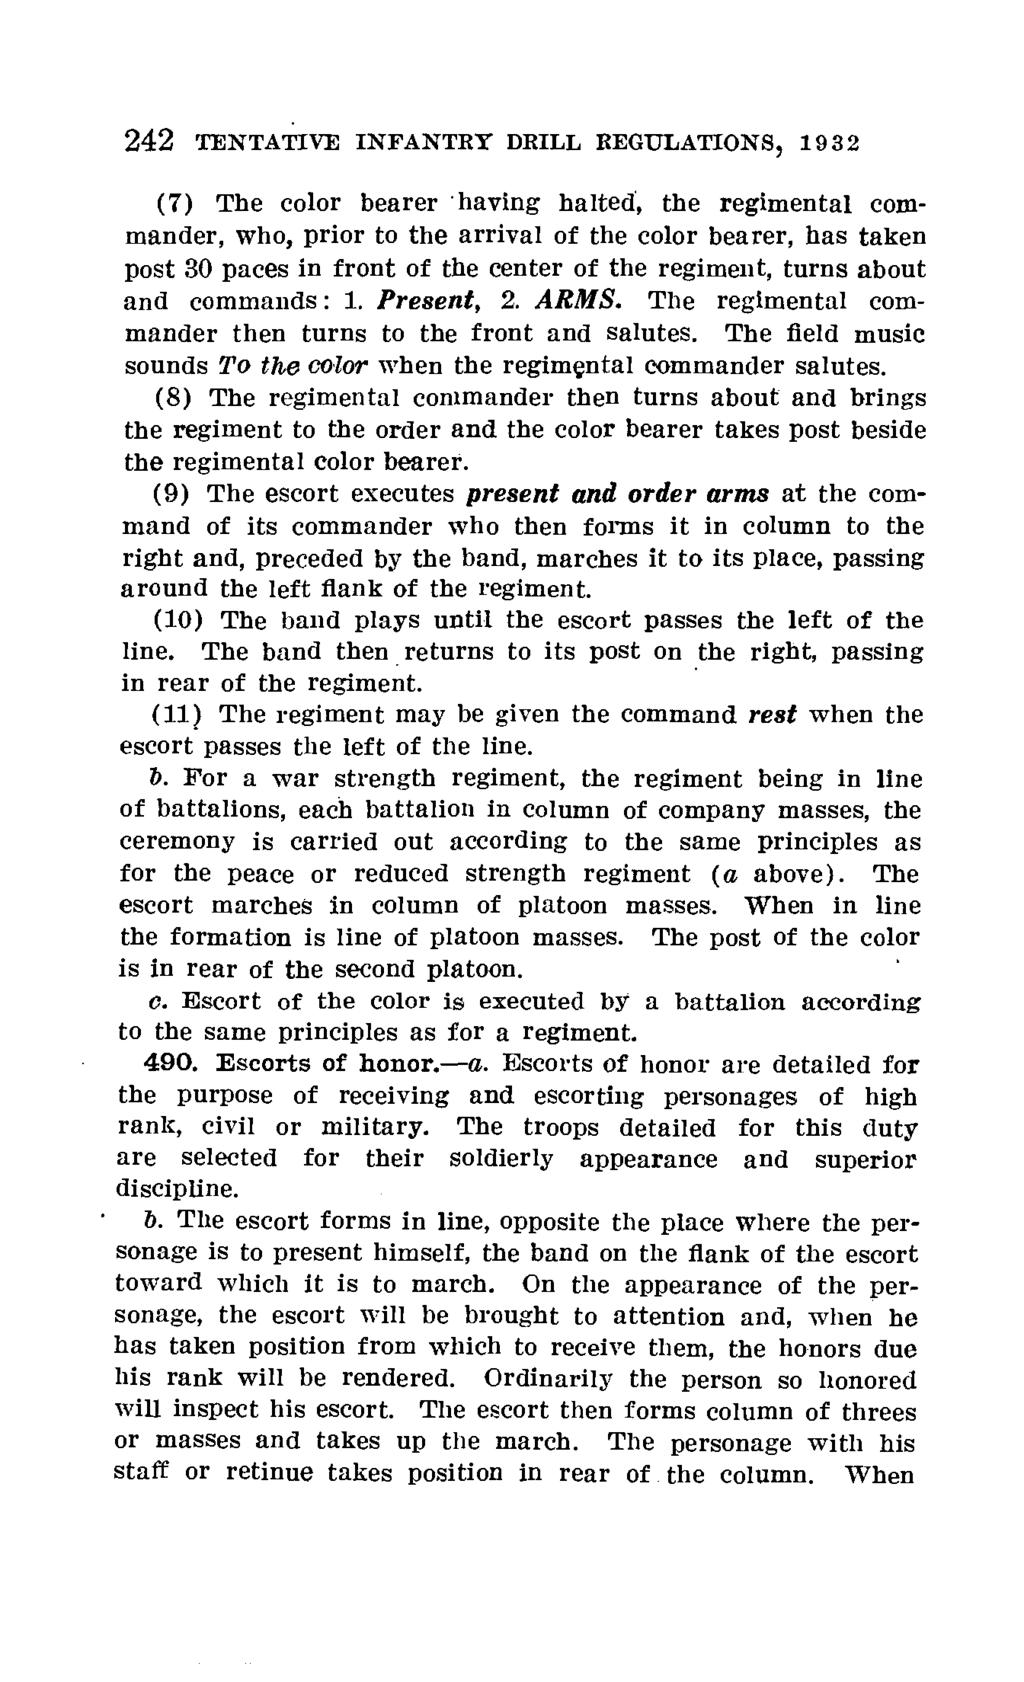 242 TENTATIVE INFANTRY DRILL REGULATIONS, 1932 (7) The color bearer 'having halted, the regimental commander, who, prior to the arrival of the color bearer, has taken post 30 paces in front of the